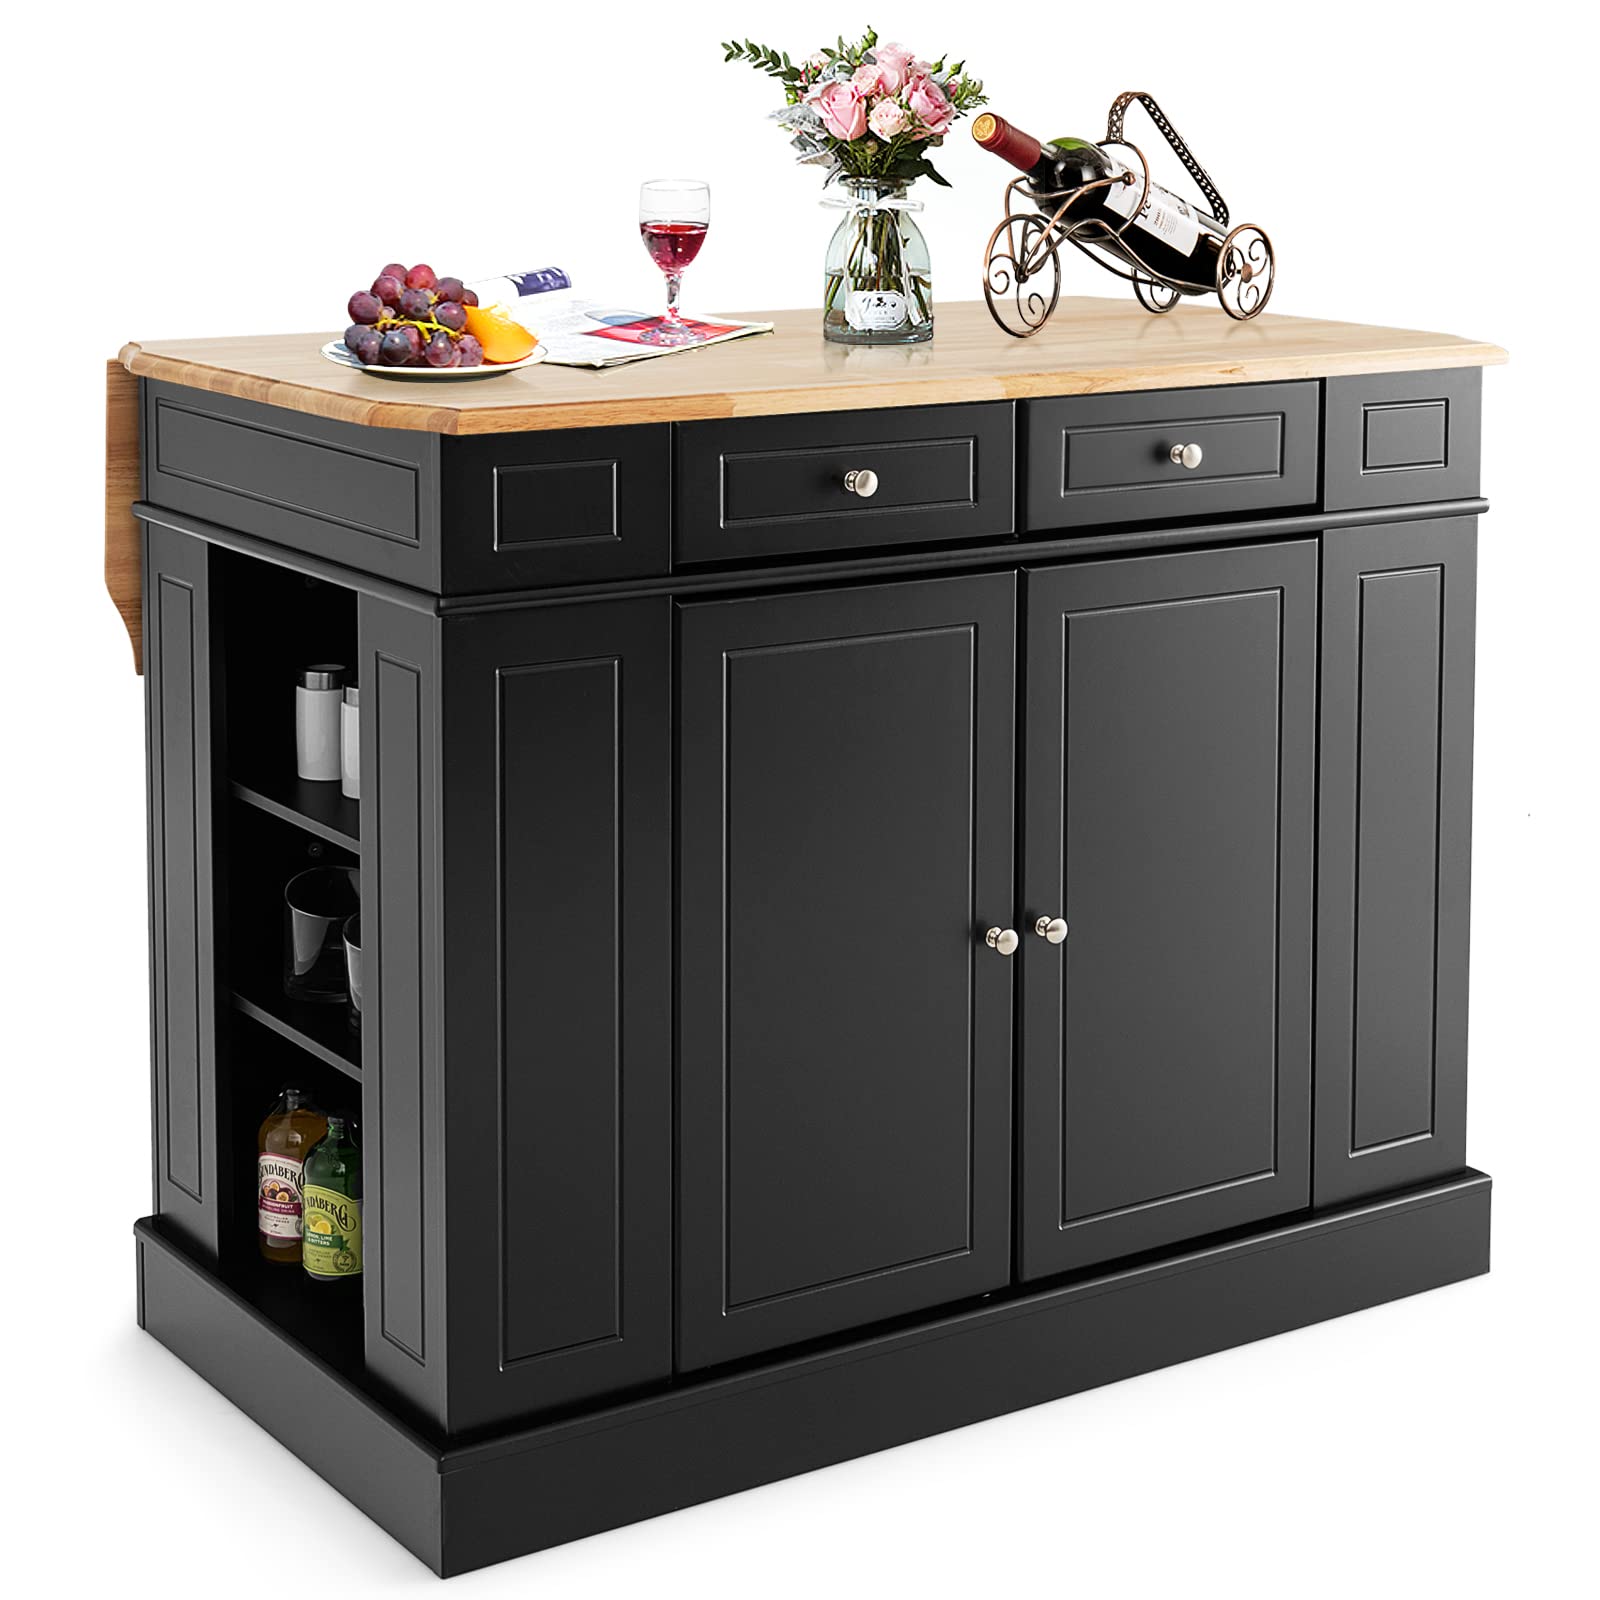 Giantex Kitchen Island with Drop Leaf, Rubber Wood Top, 2 Drawers, Storage Cabinets